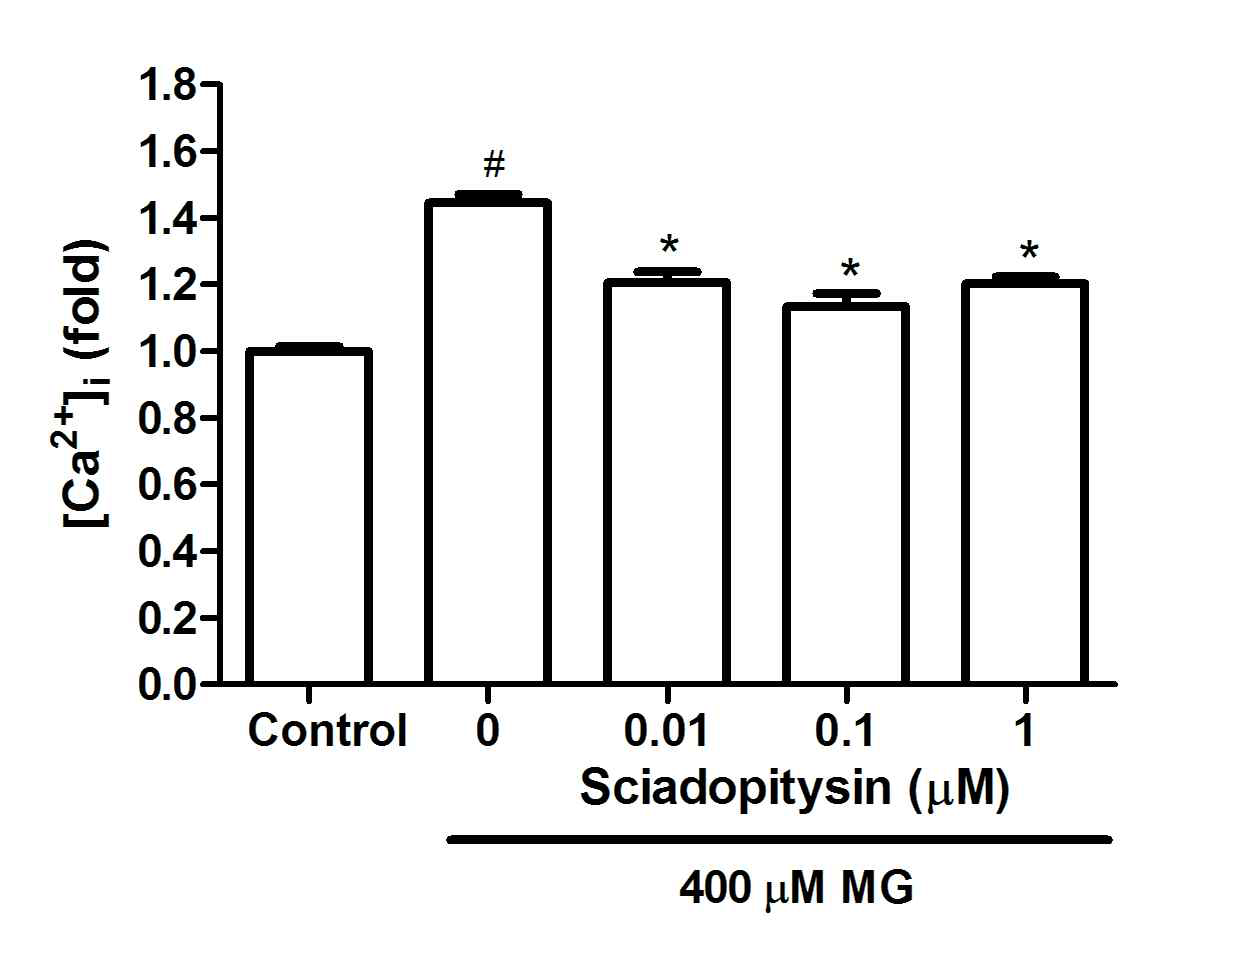 Effects of sciadopitysin on intracellular Ca2+ concentration in MG-treated SK-N-MC cells. SK-N-MC cells were pre-incubated with sciadopitysin before treatment with 400 μM MG for 48 h, and then changes in the levels of intracellular Ca2+ concentration ([Ca2+]i) were measured by the Fura-2AM fluorescence method. #P < 0.05, control vs. MG; *P < 0.05, MG vs. sciadopitysin